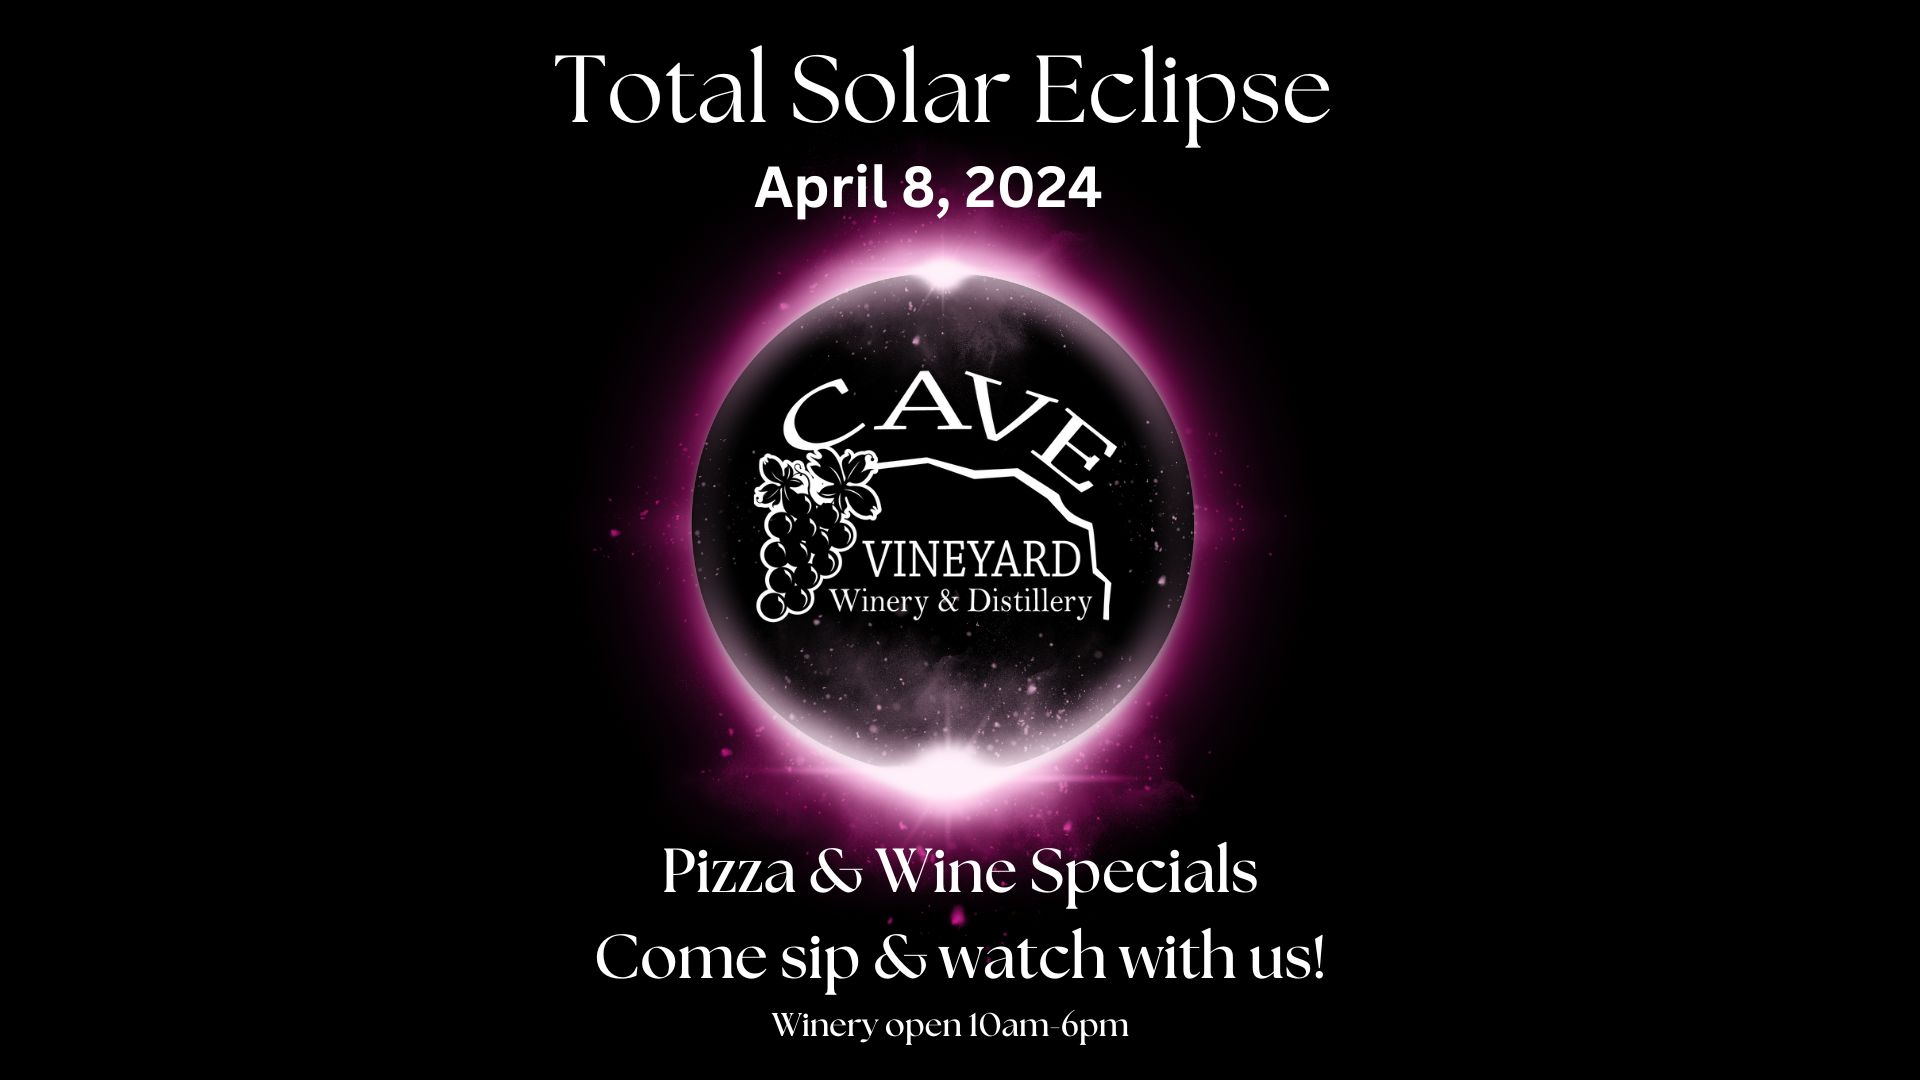 Total Solar Eclipse at Cave Vineyards